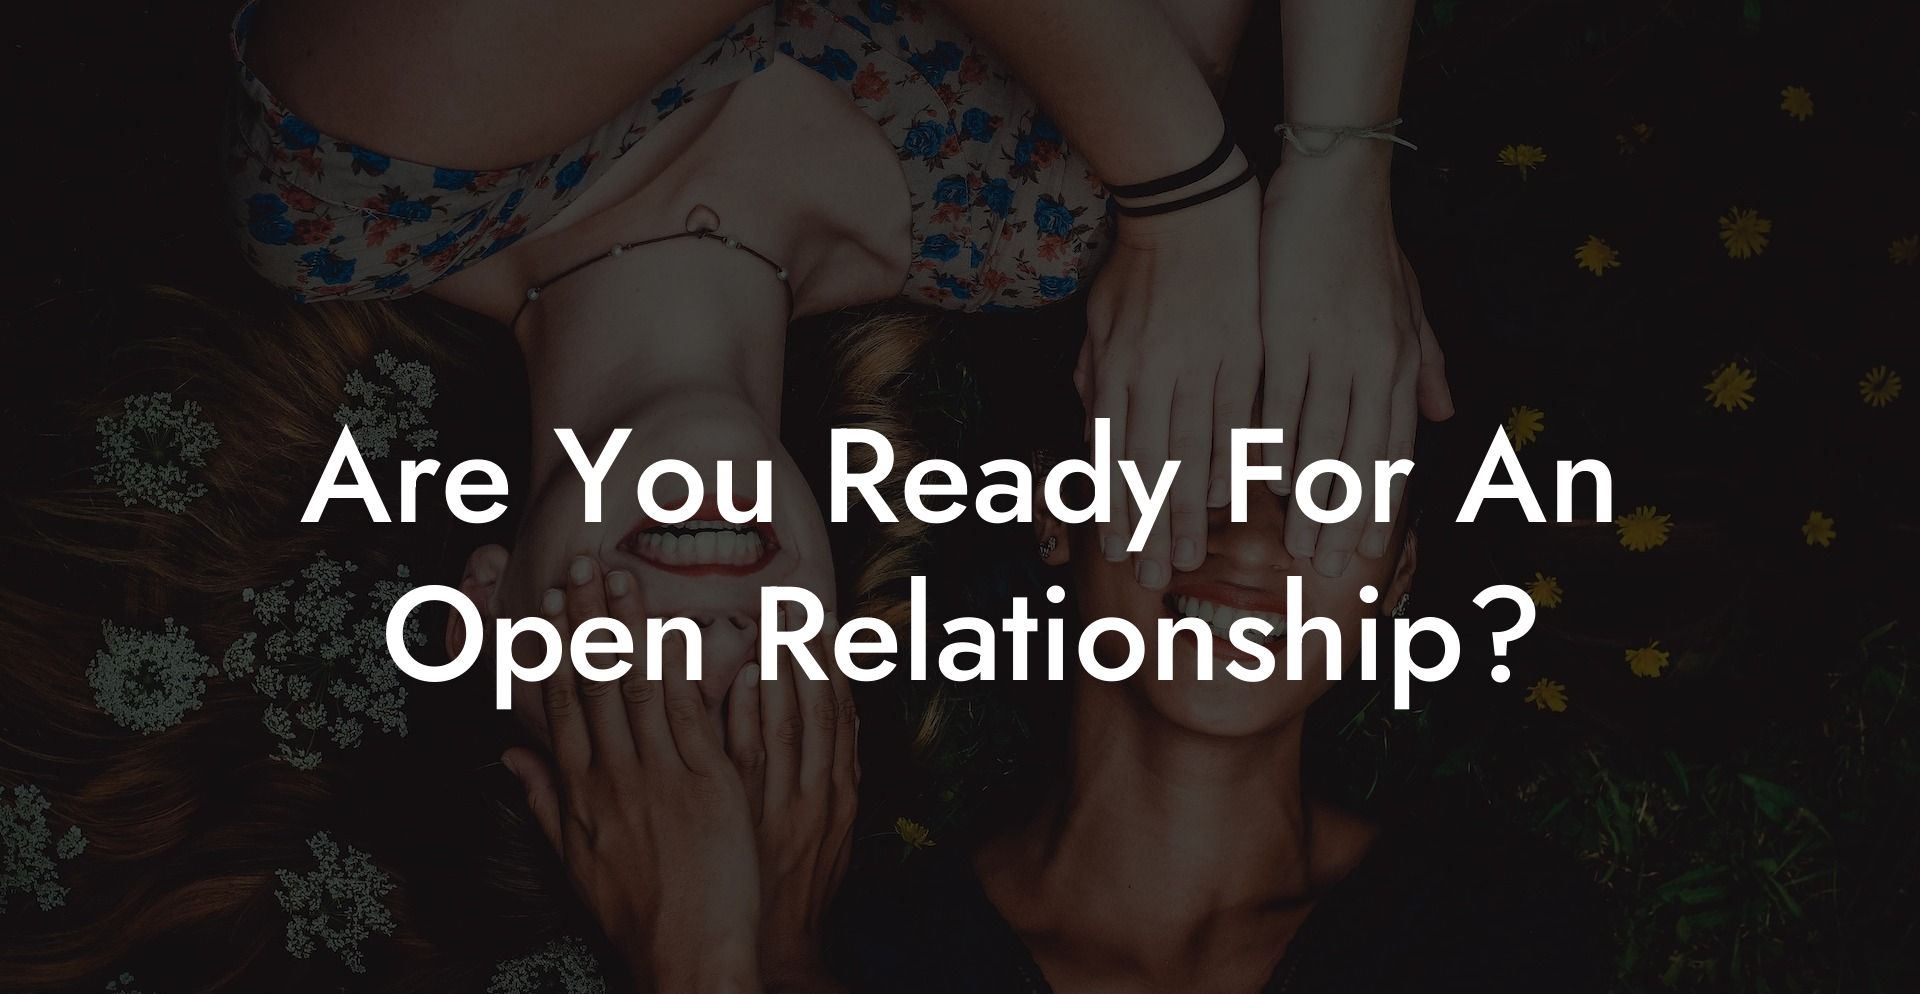 Are You Ready For An Open Relationship?